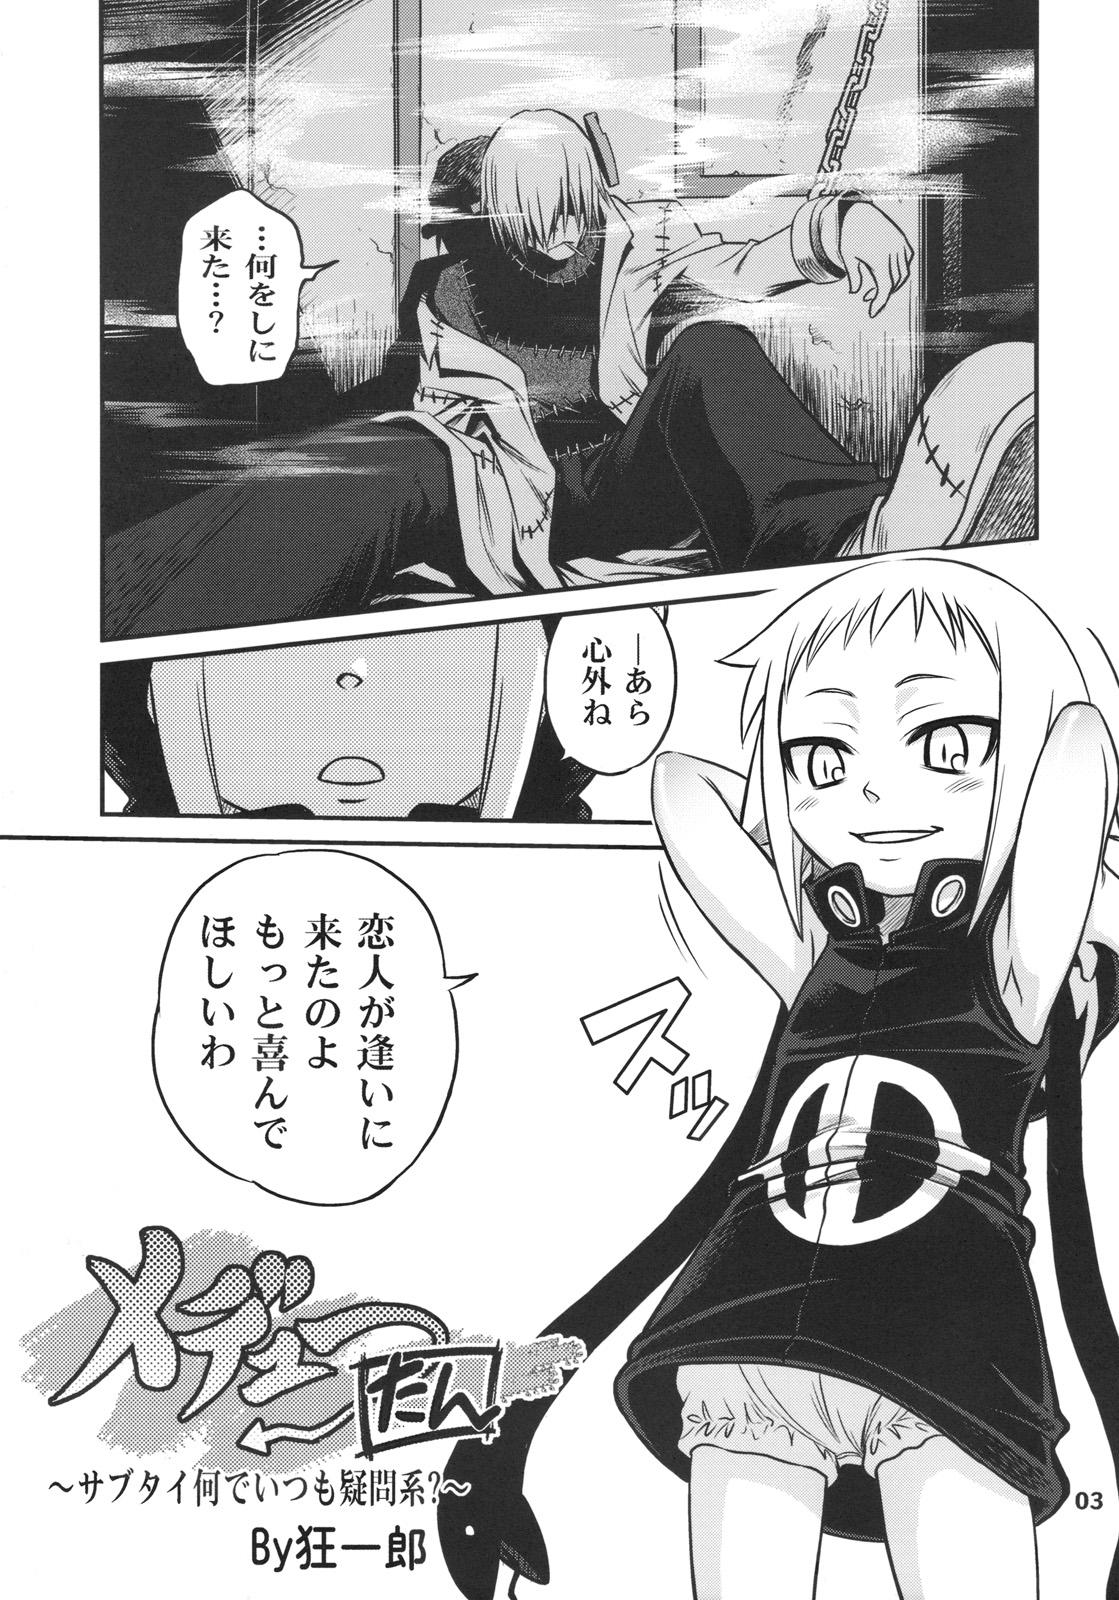 Nut Medhu-tan - Soul eater Reverse Cowgirl - Page 2